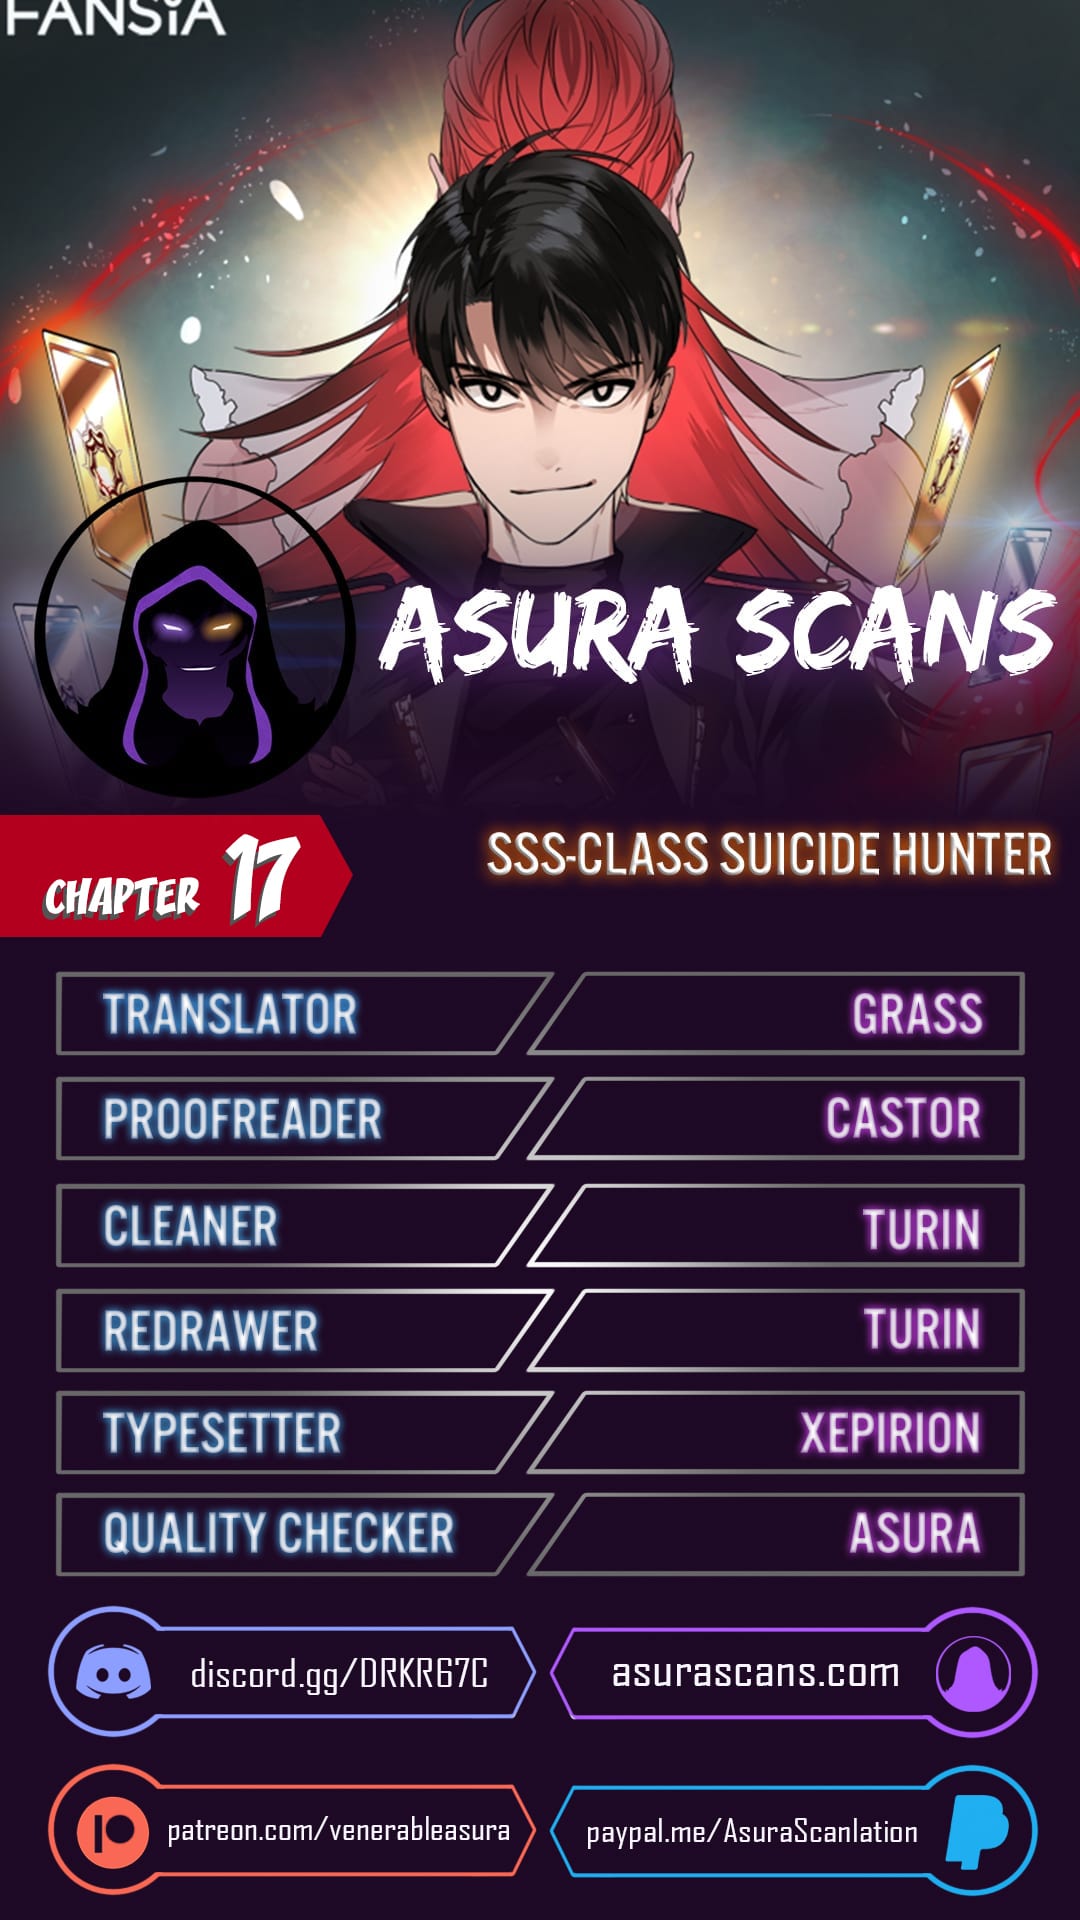 SSS-Class Suicide Hunter chapter 17